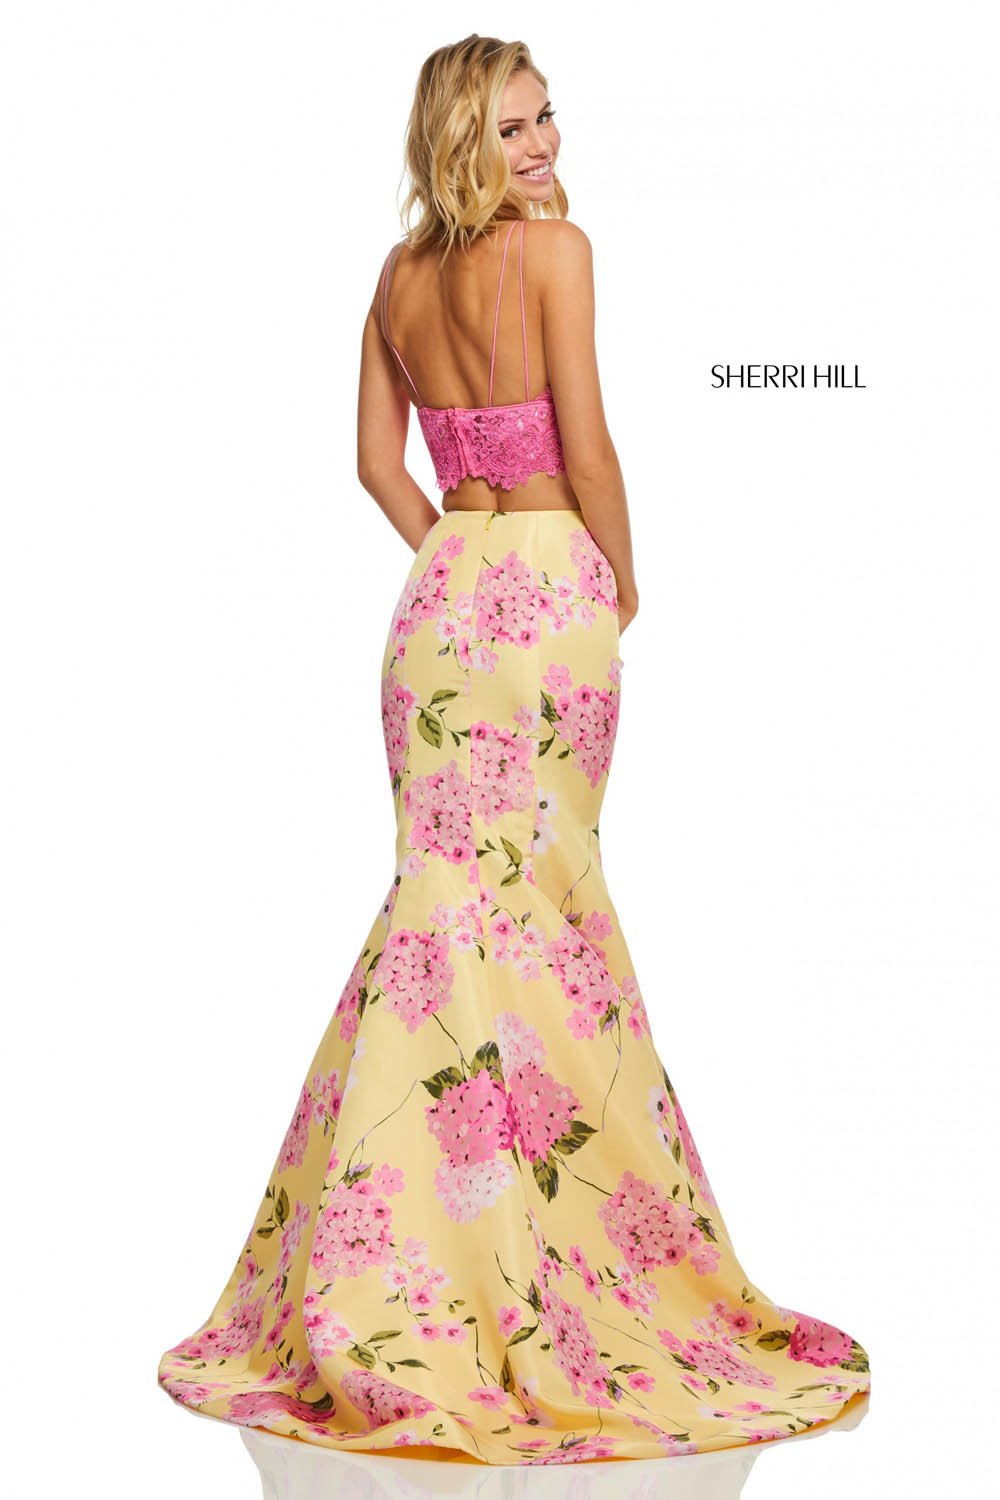 Sherri Hill 52635 dress images in these colors: Candy Pink Yellow, Lilac Ivory, Light Blue Light Yellow Print, Lilac Light Blue Print, Candy Pink Ivory Print.